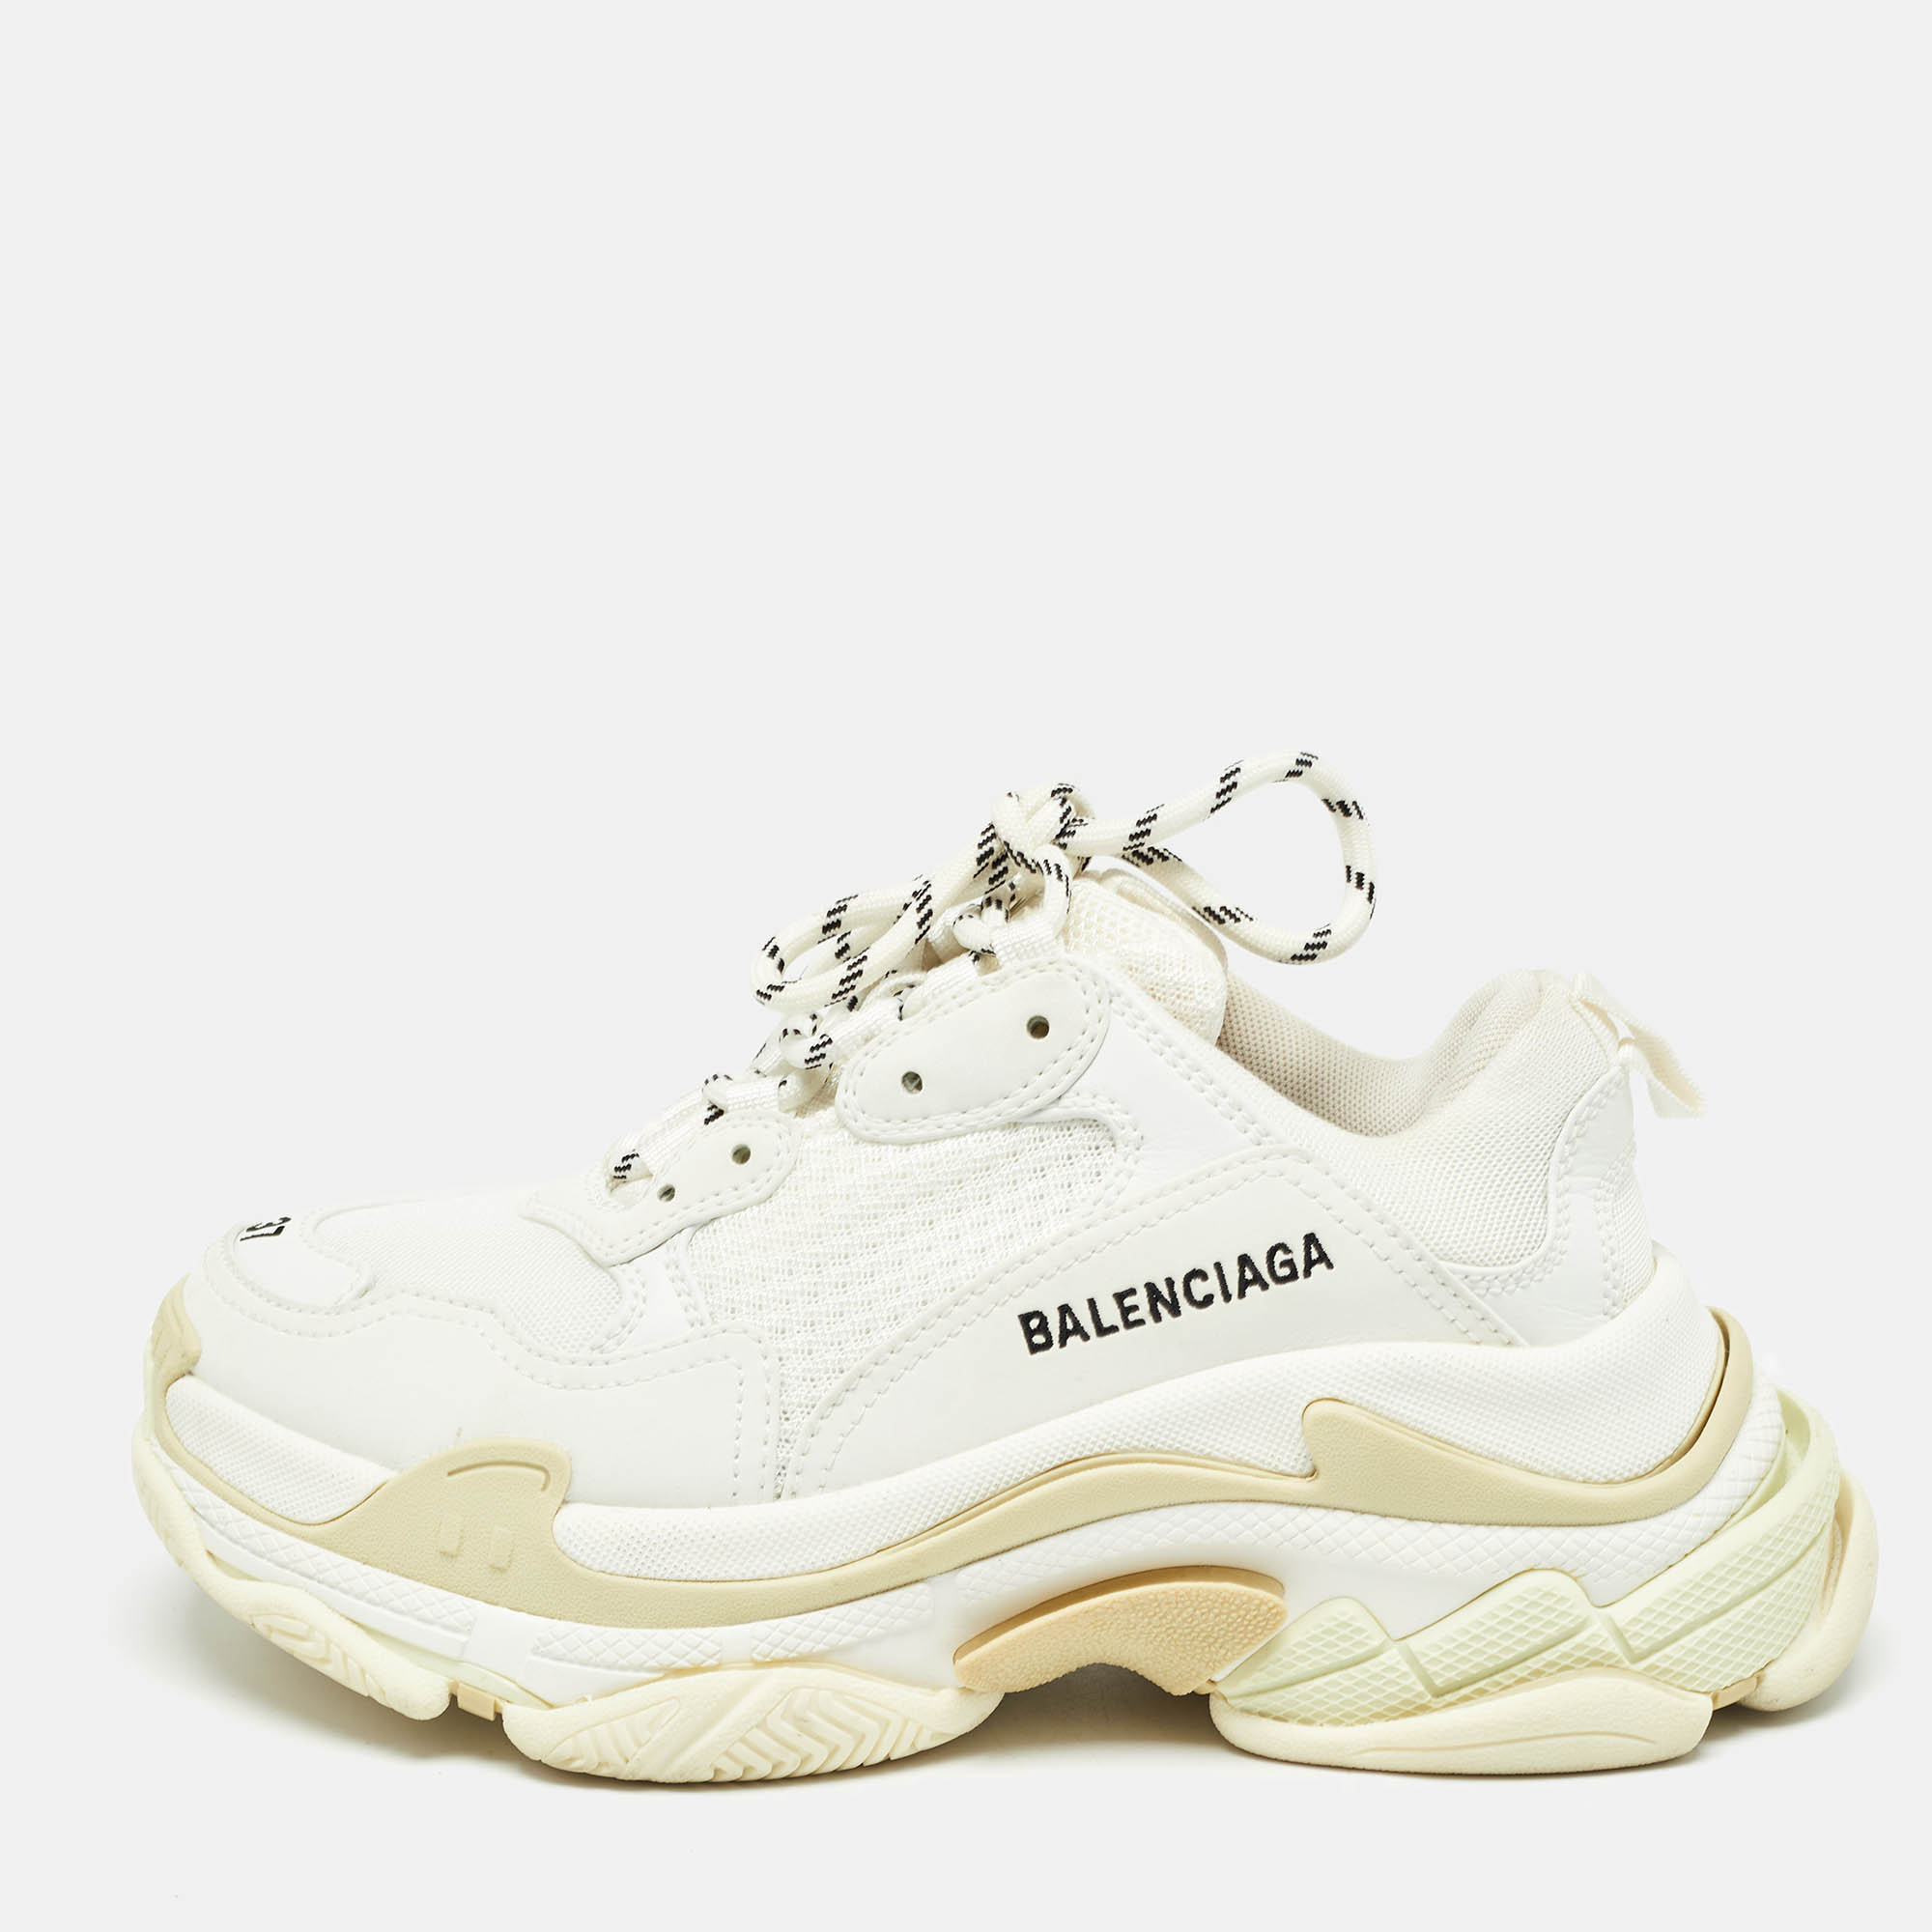 Balenciaga white faux leather and mesh triple s sneakers size 37